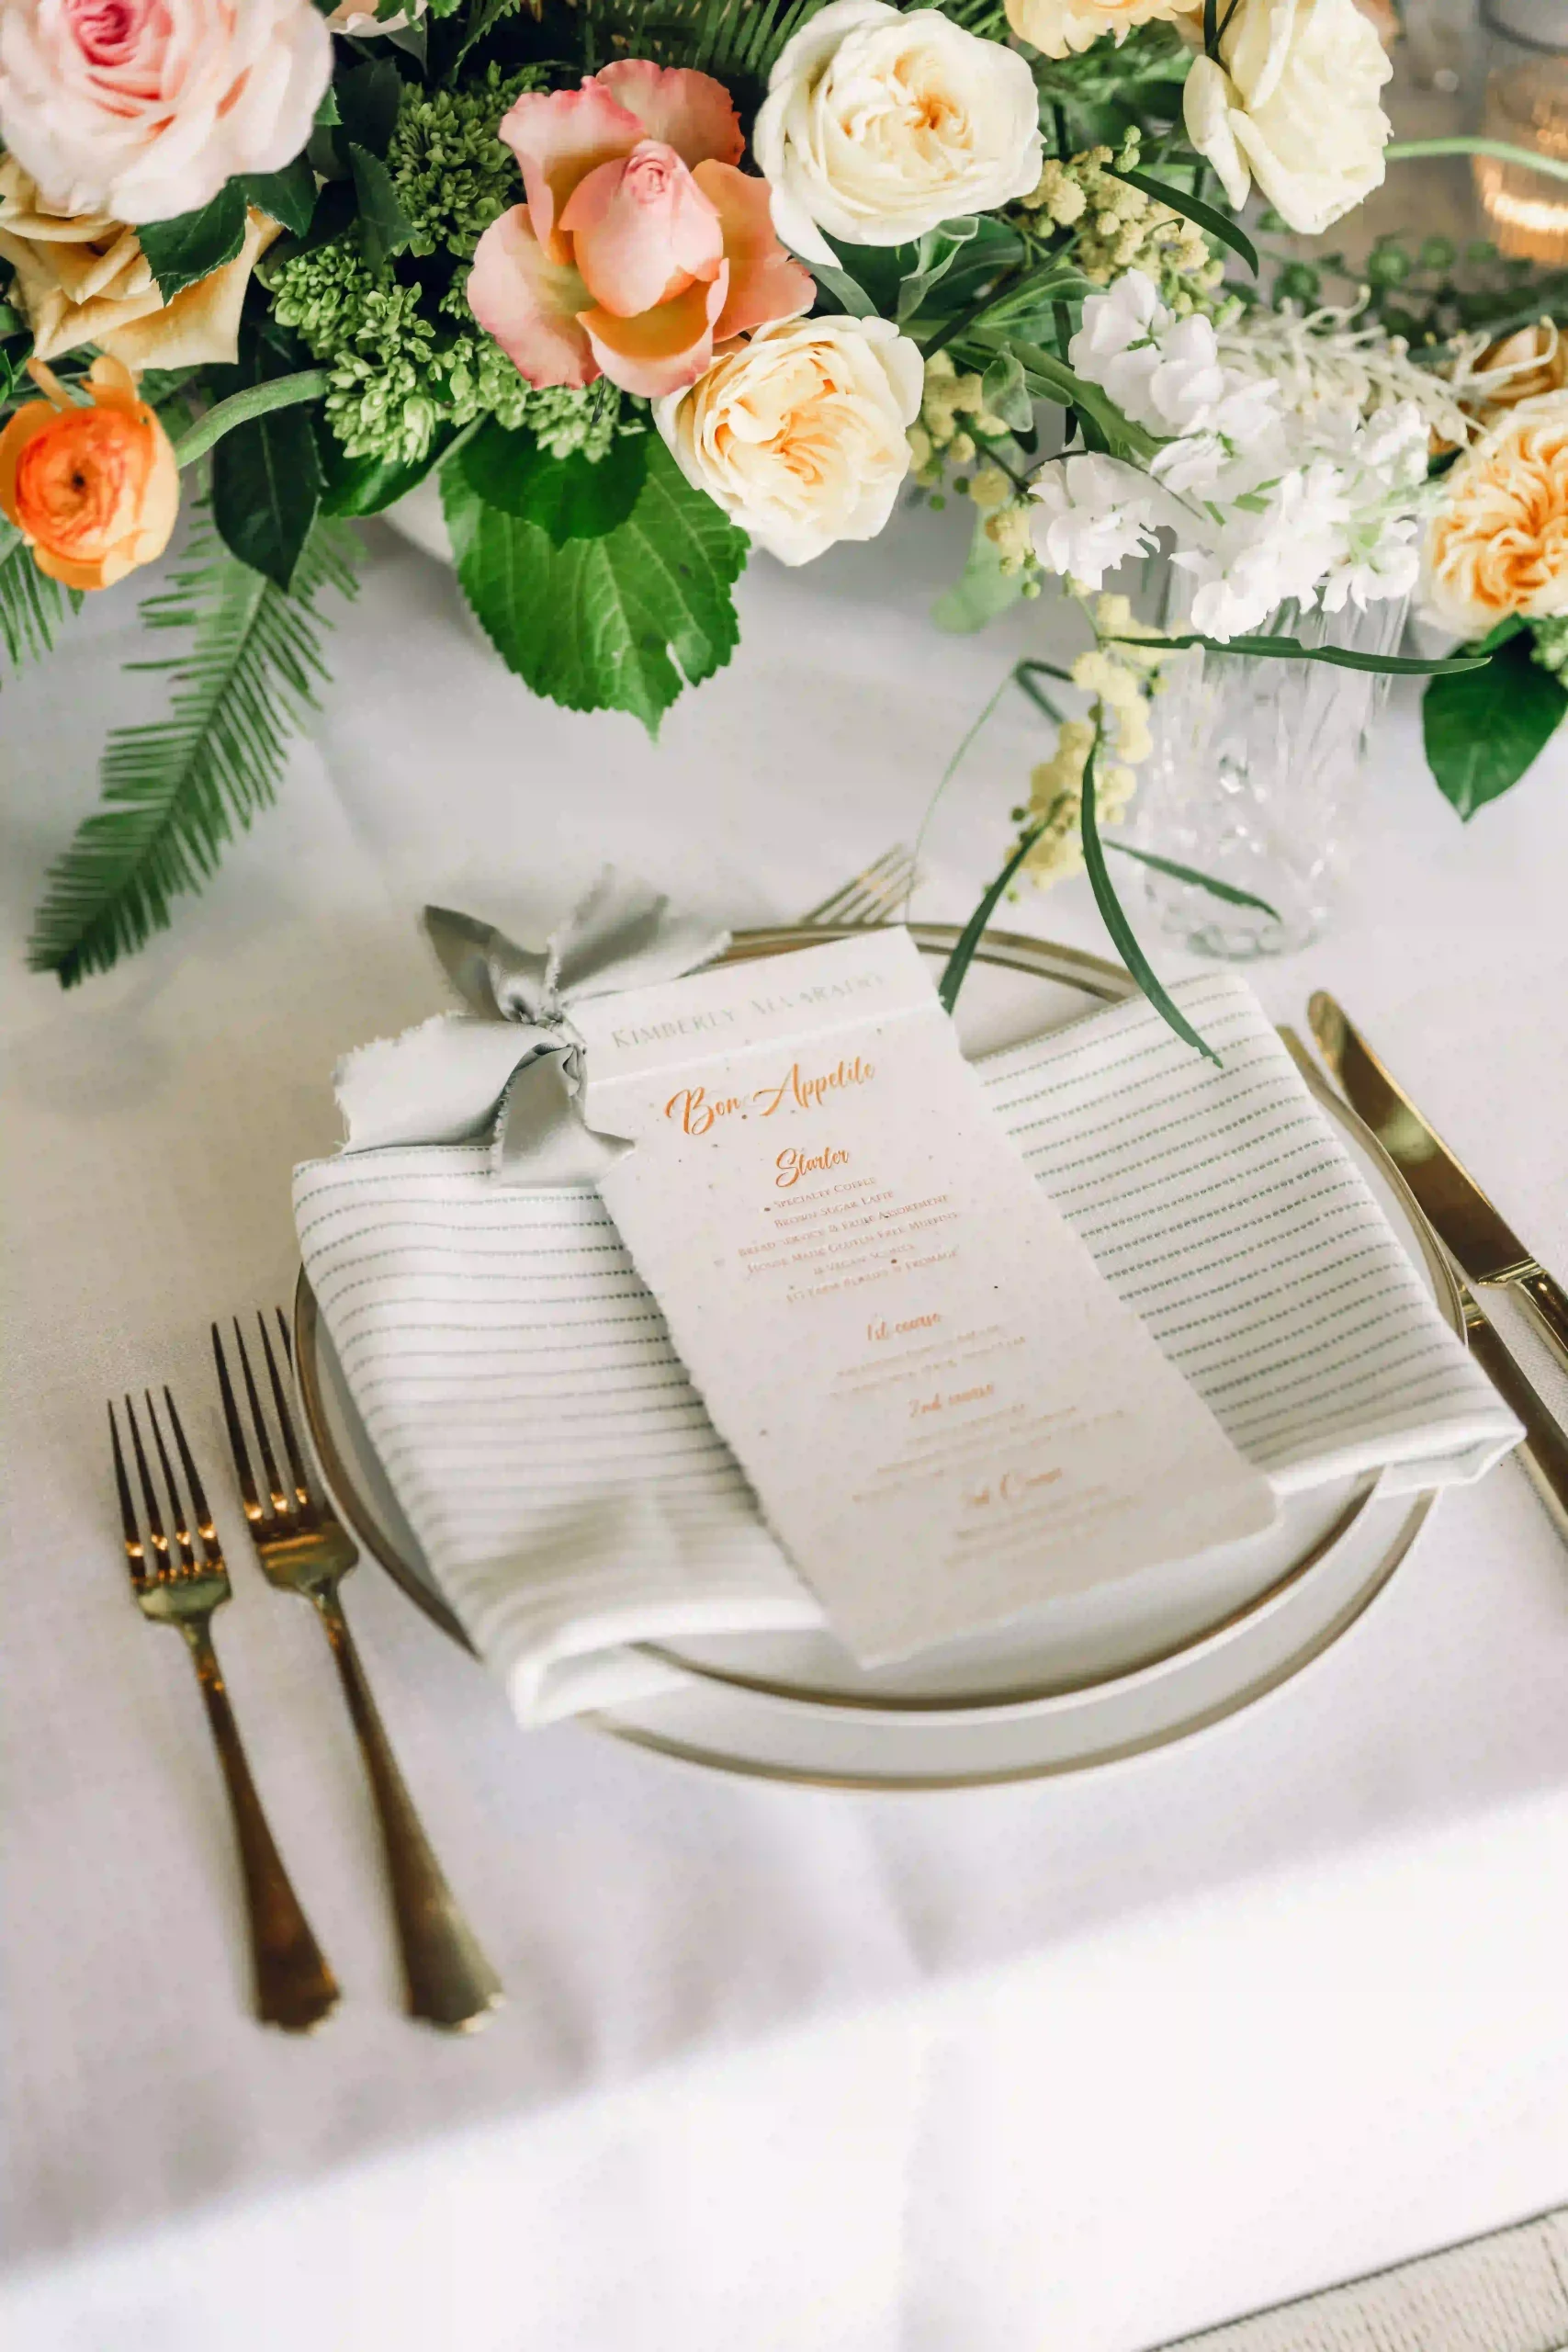 Wedding table setting with silverware and floral decorations